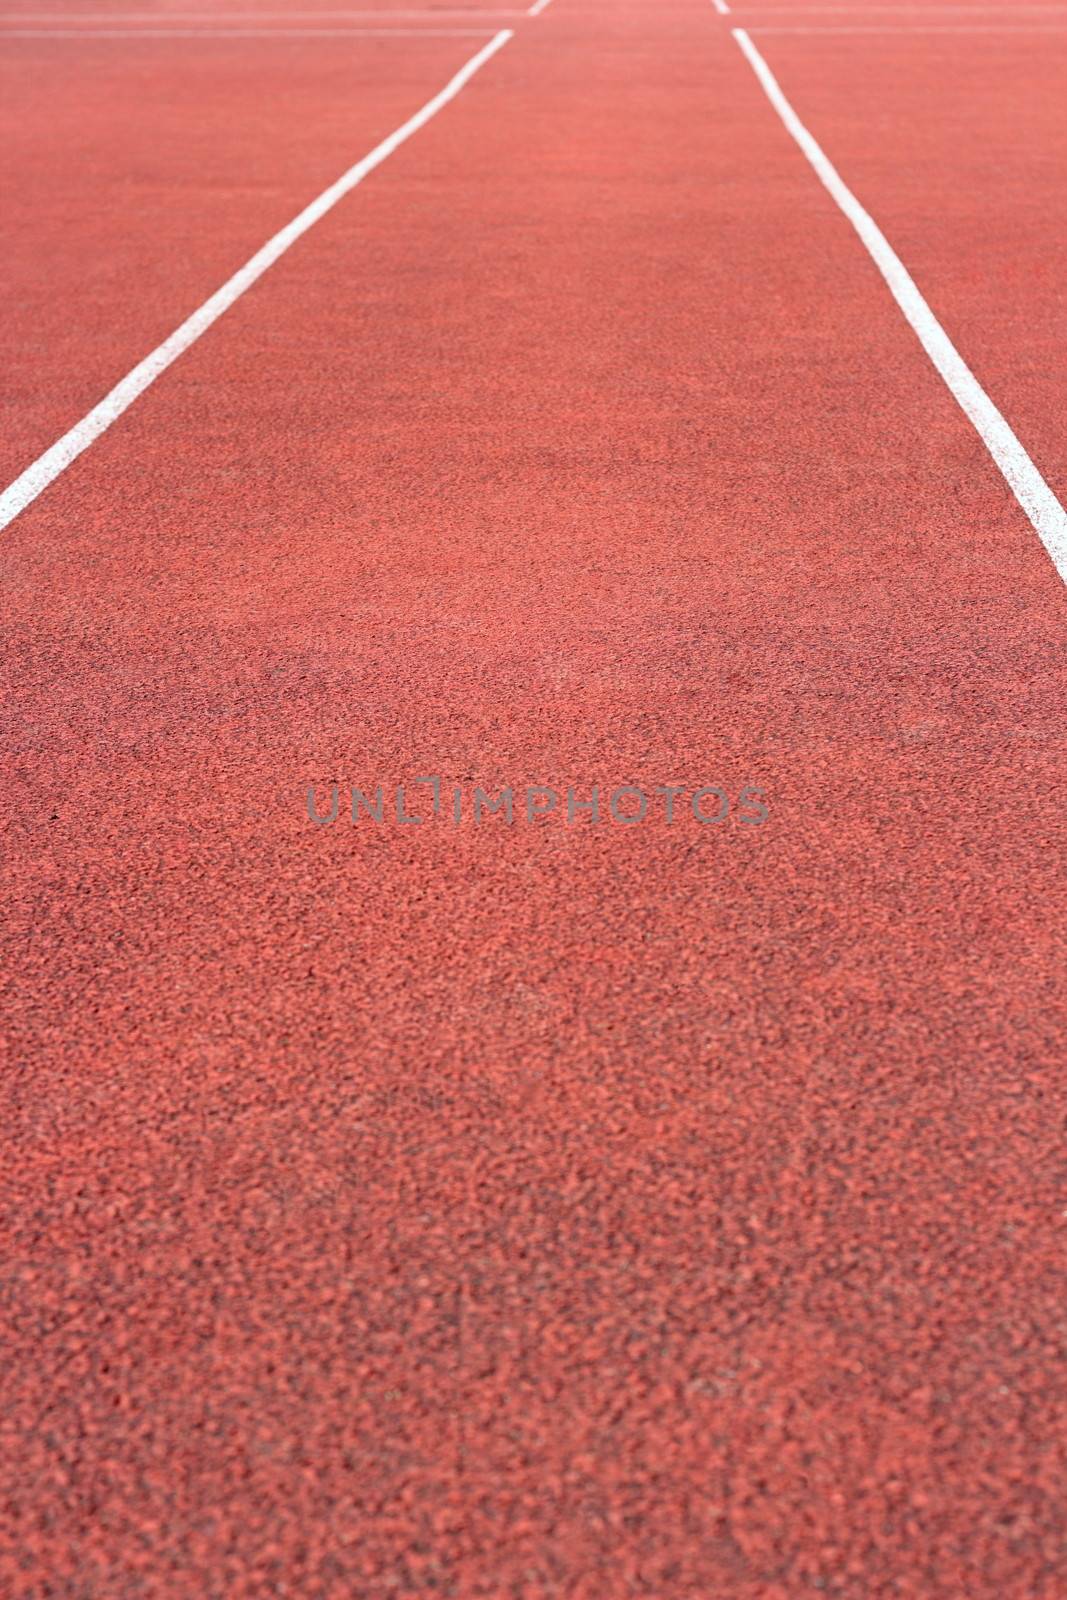 perspective of cinder running track at the sport stadium